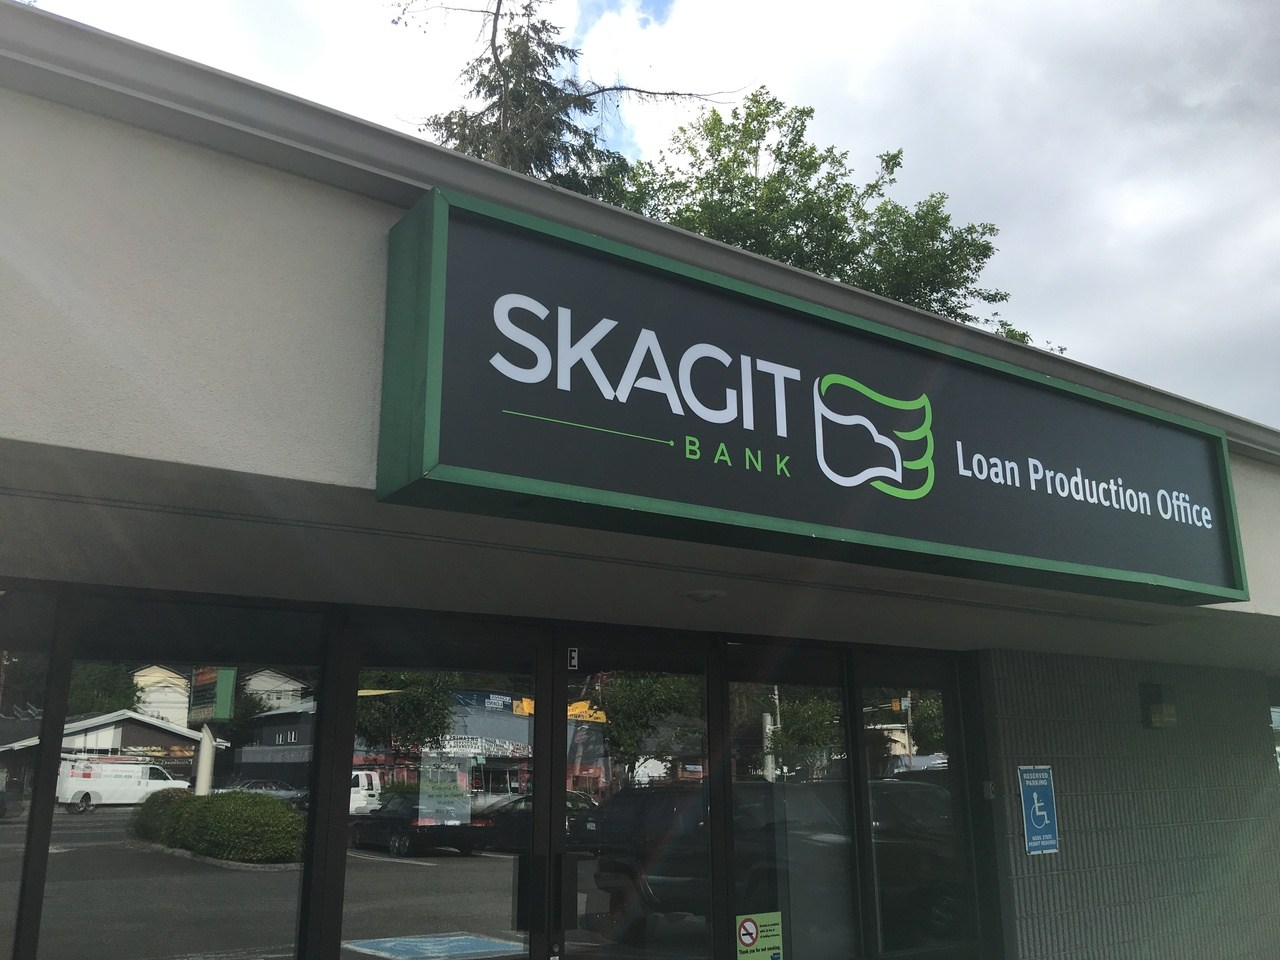 Skagit Bank has opened a new Loan Production Office in Everett.